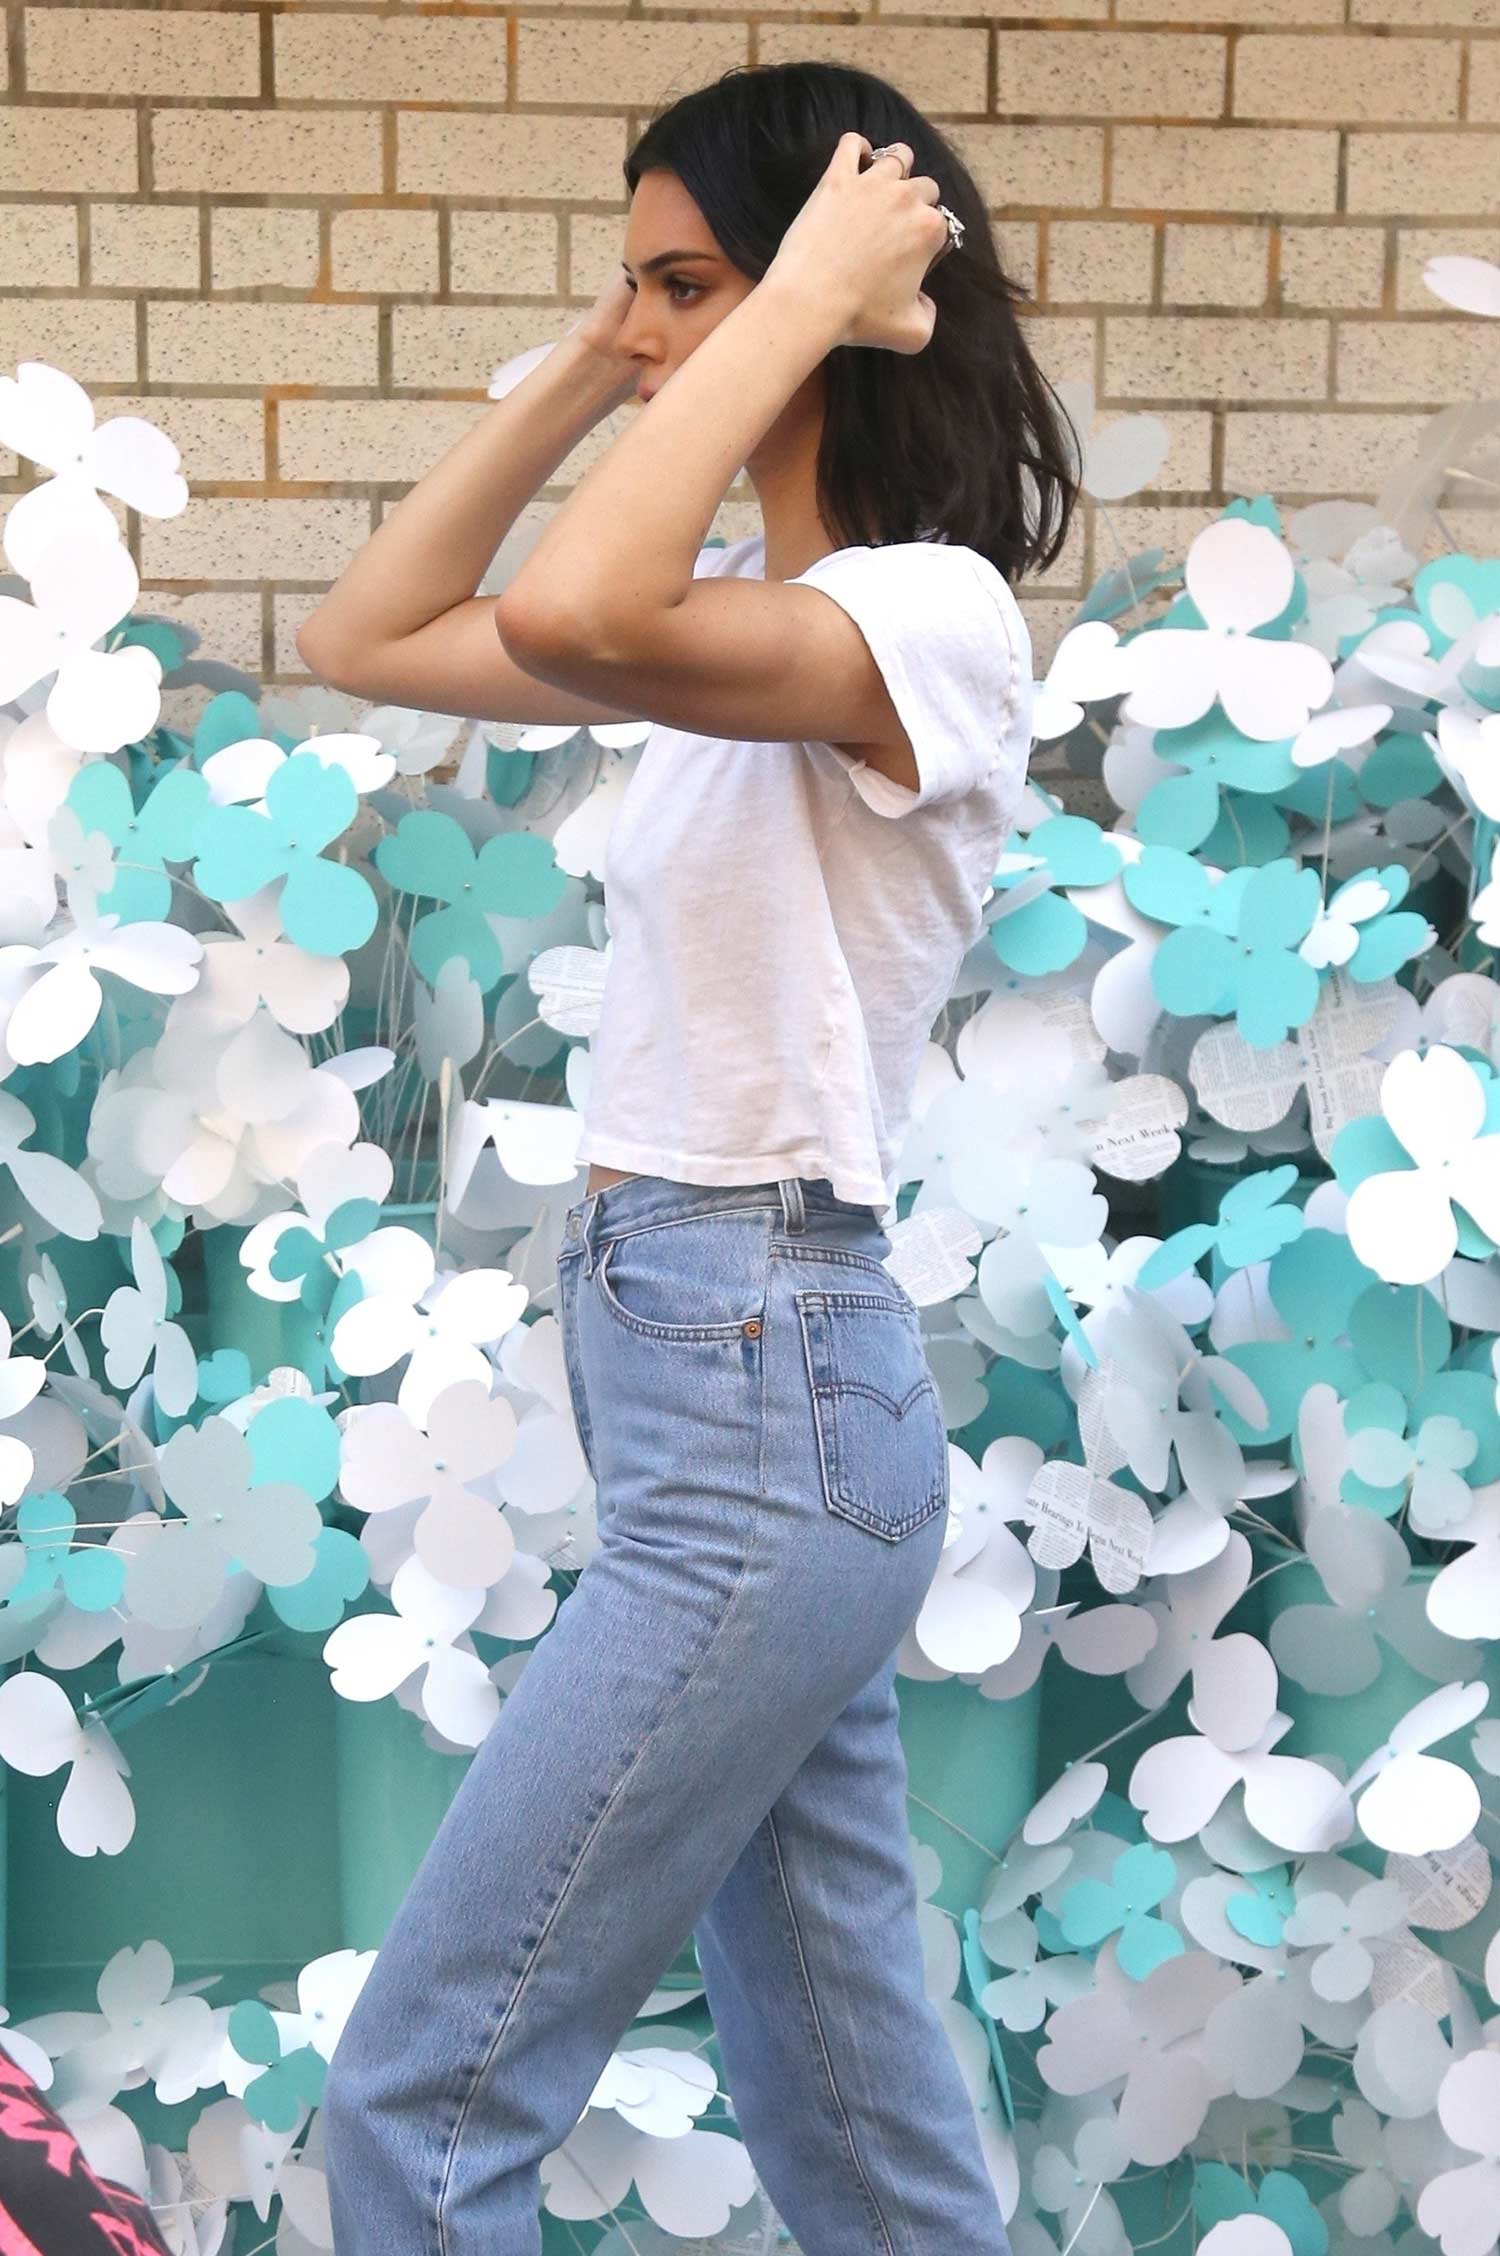 Kendall Jenner Wears Vintage Levi's Jeans THE JEANS